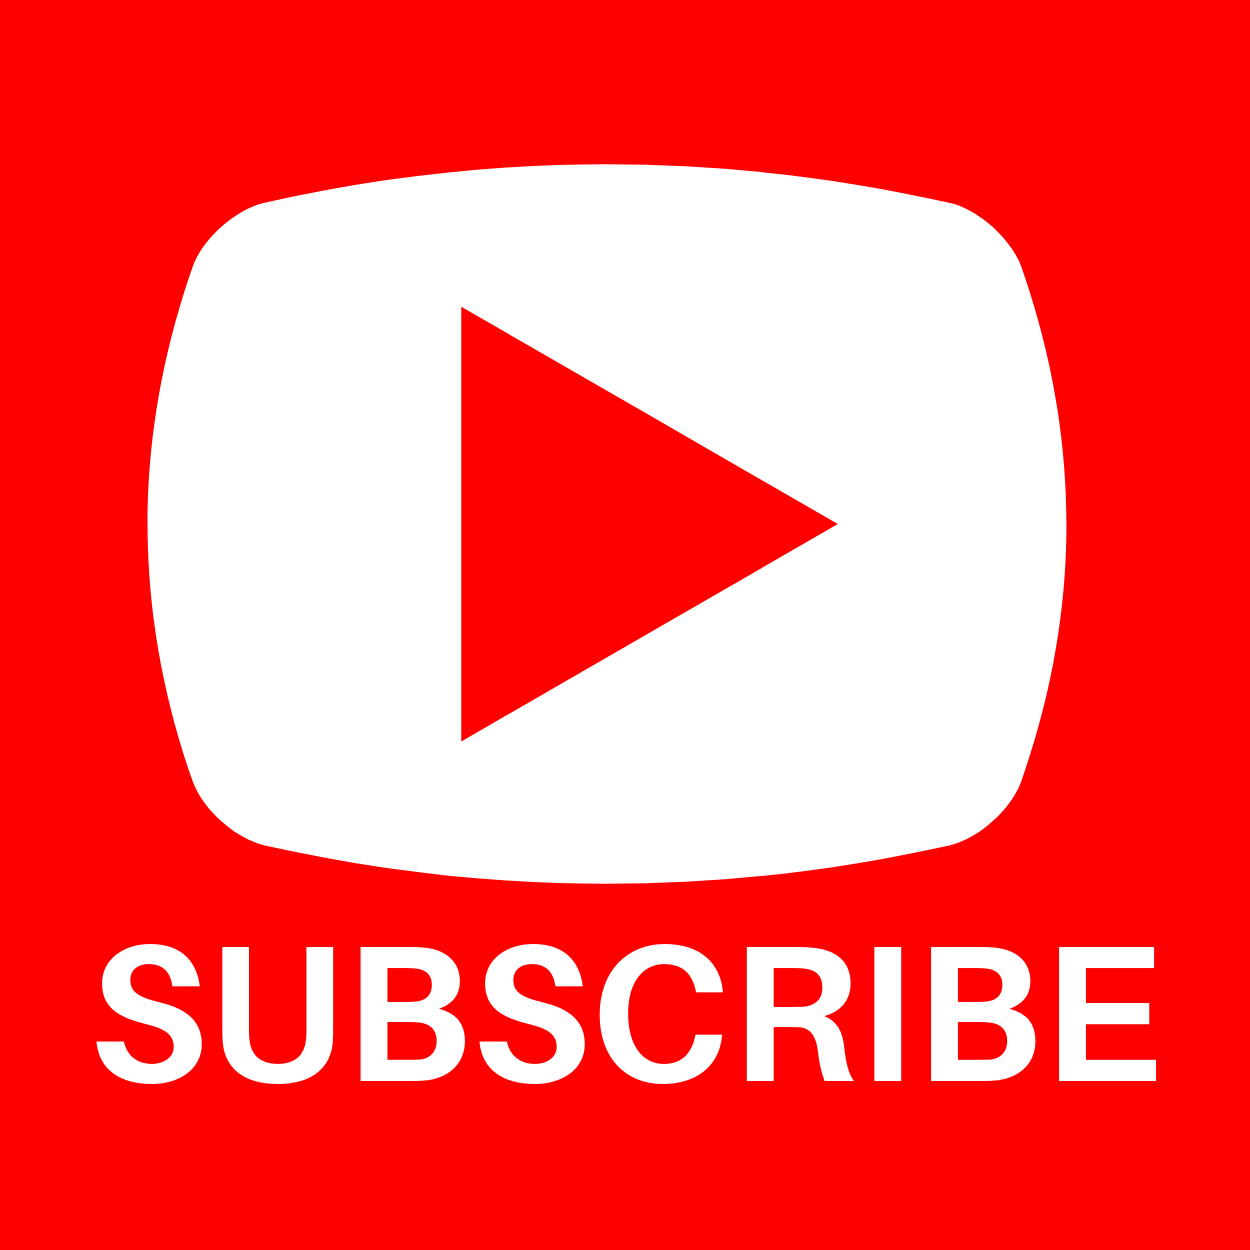 Subscribe to Our YouTube Channel to Get the Videos of the Catholic Daily Mass Readings